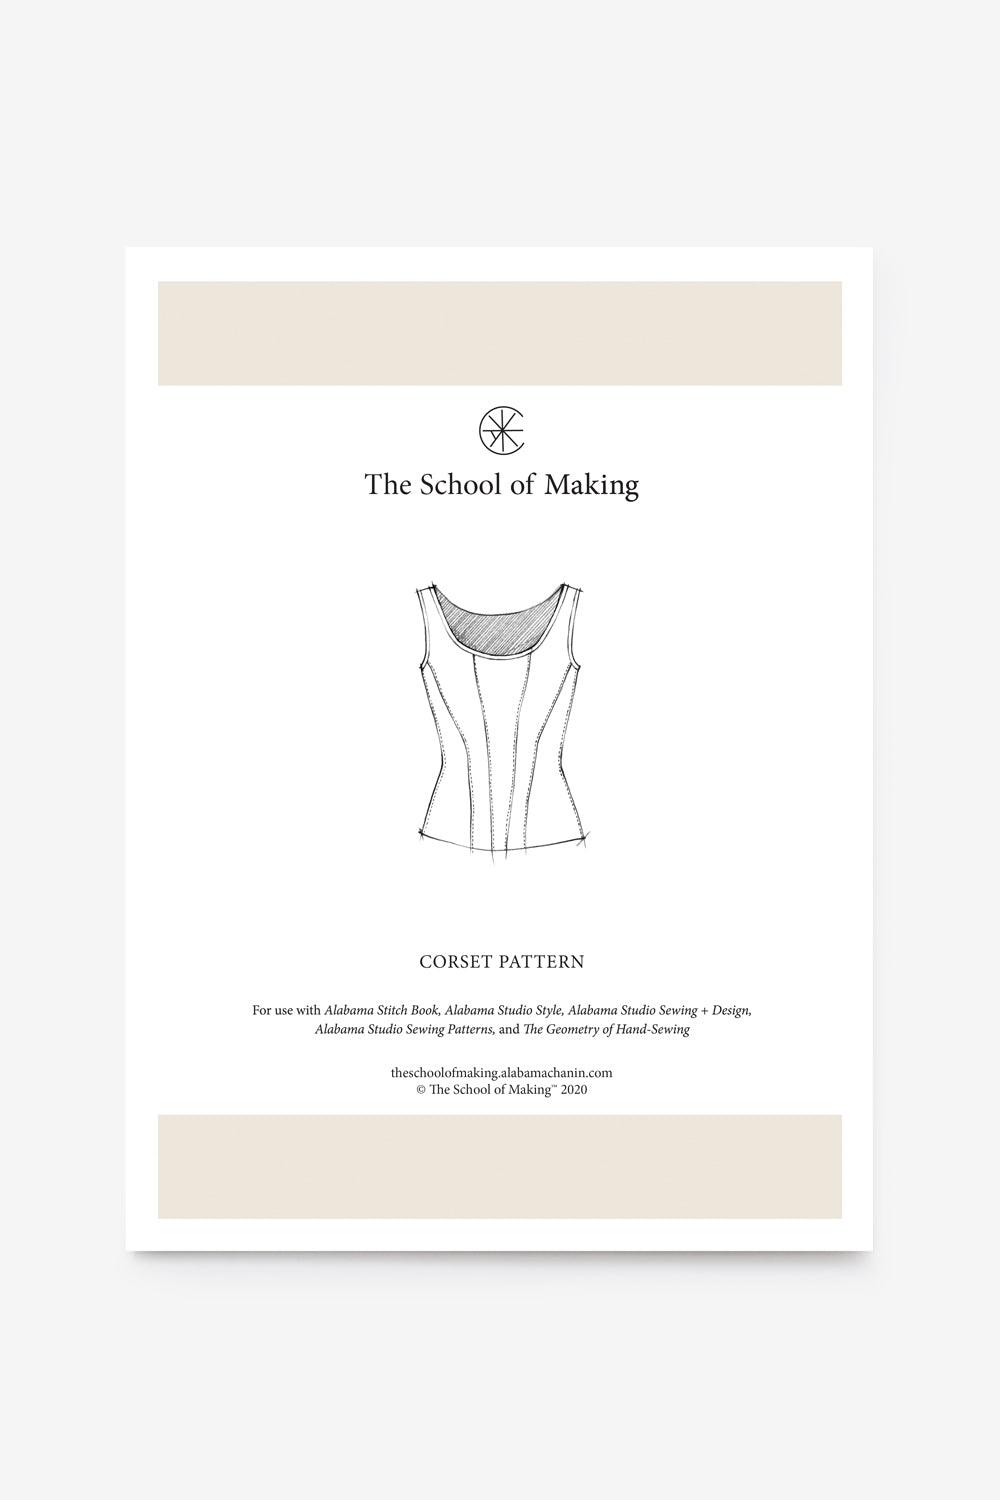 Book on How to Make a Striped Corset